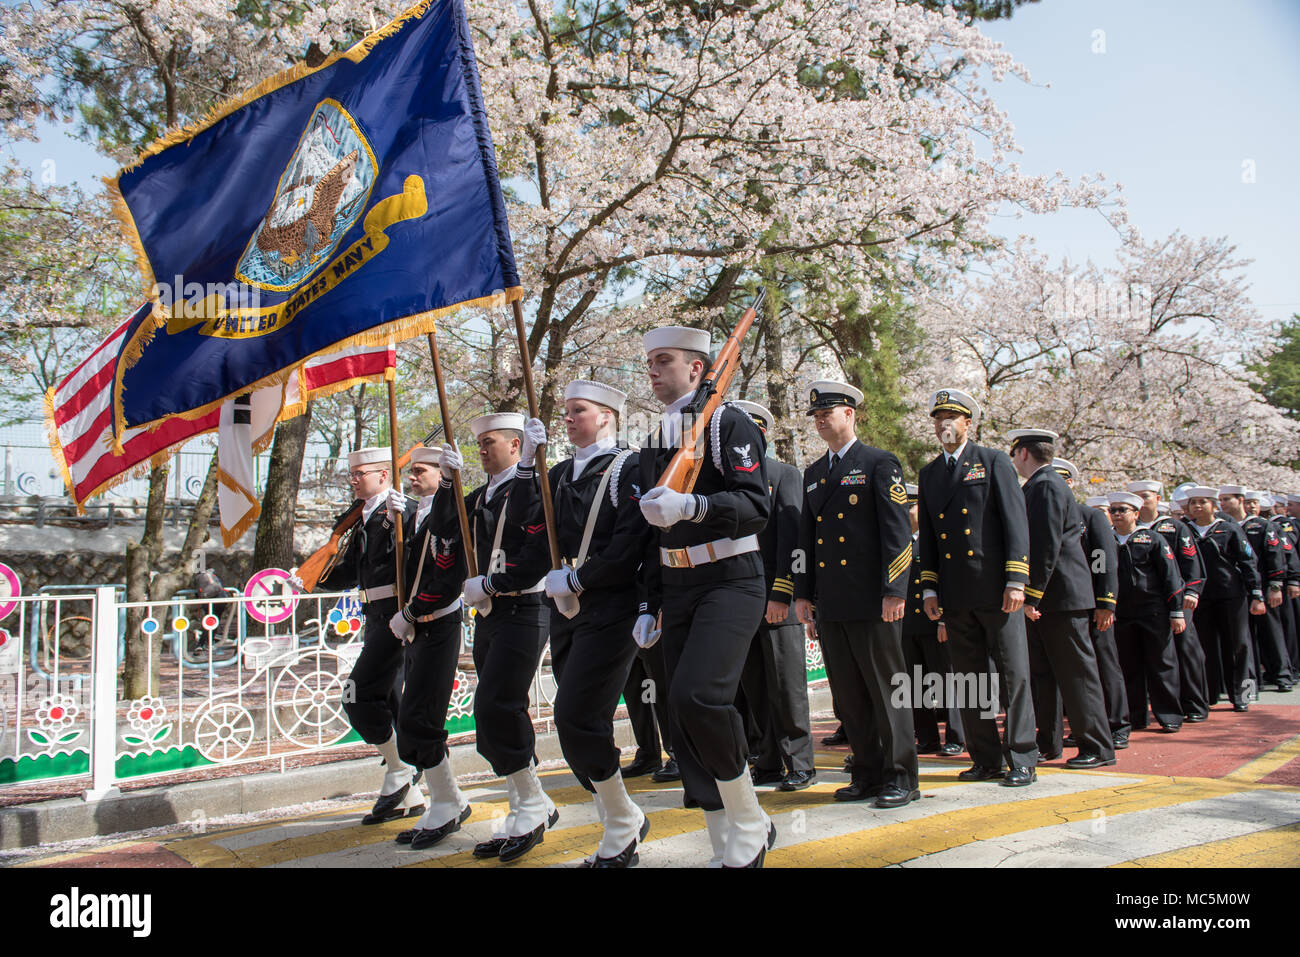 180406-N-TB148-050 CHINHAE, Republic of Korea (April 06, 2018) Sailors assigned to Commander, Fleet Activities Chinhae (CFAC), and Commander, U.S. Naval Forces Korea (CNFK) participate in the Jinhae Military Parade Festival also known as the Jinhae Cherry Blossom Festival in Changwon. In commemoration of famed ROK naval hero Admiral Yi Sun-shin the ten-day festival coincides with the annual spring bloom of the cherry blossom trees which attract over 2 million visitors. (U.S. Navy photo by Mass Communication Specialist Seaman William Carlisle) Stock Photo